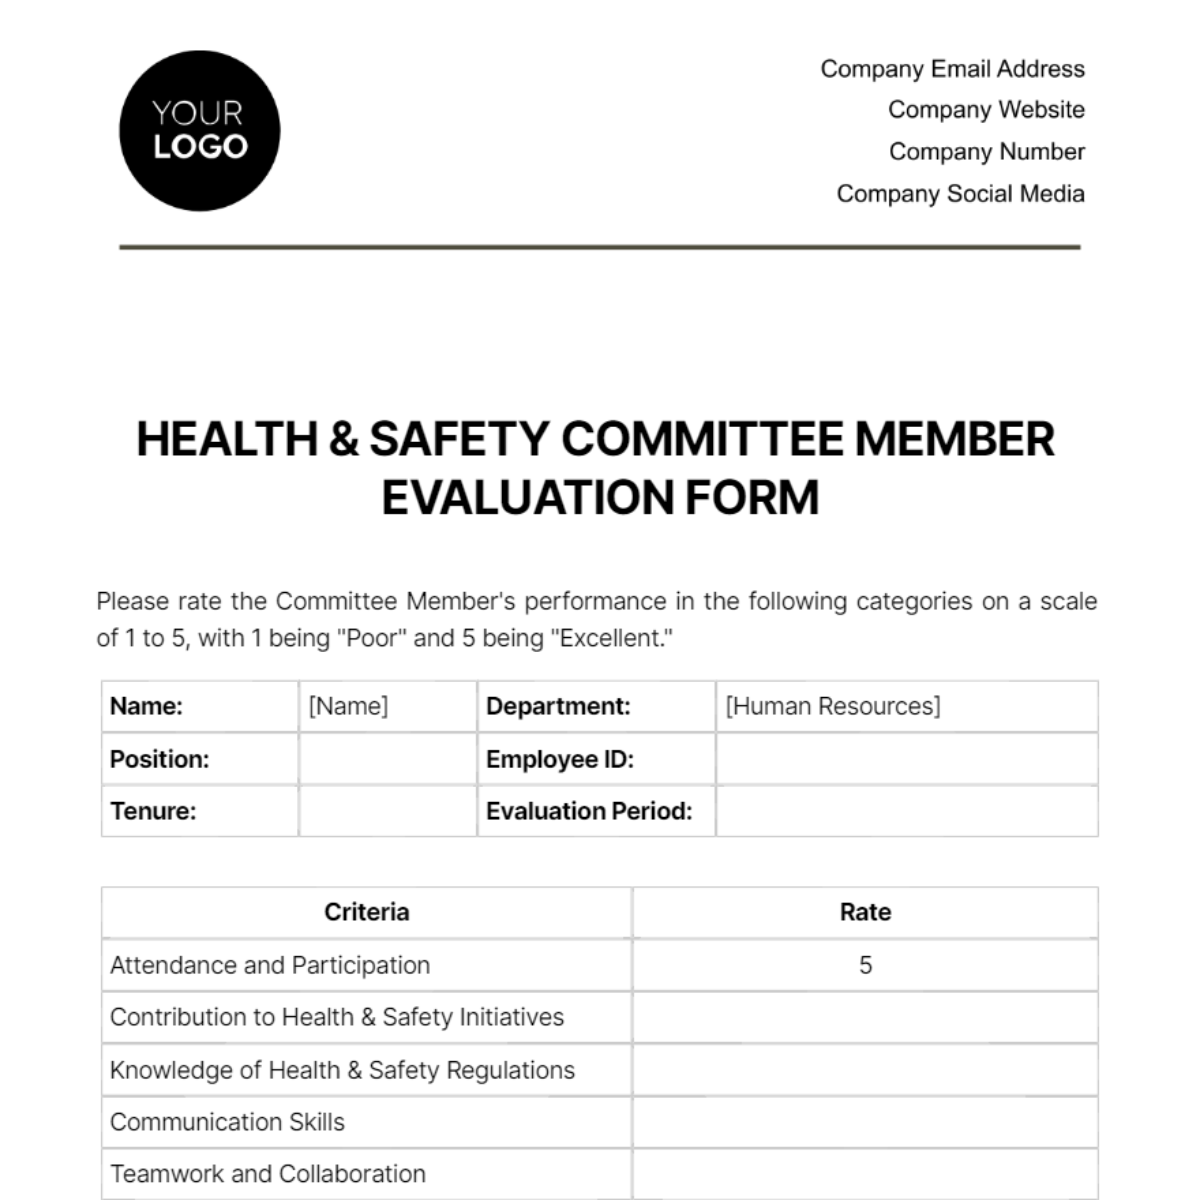 Free Health & Safety Committee Member Evaluation Form Template